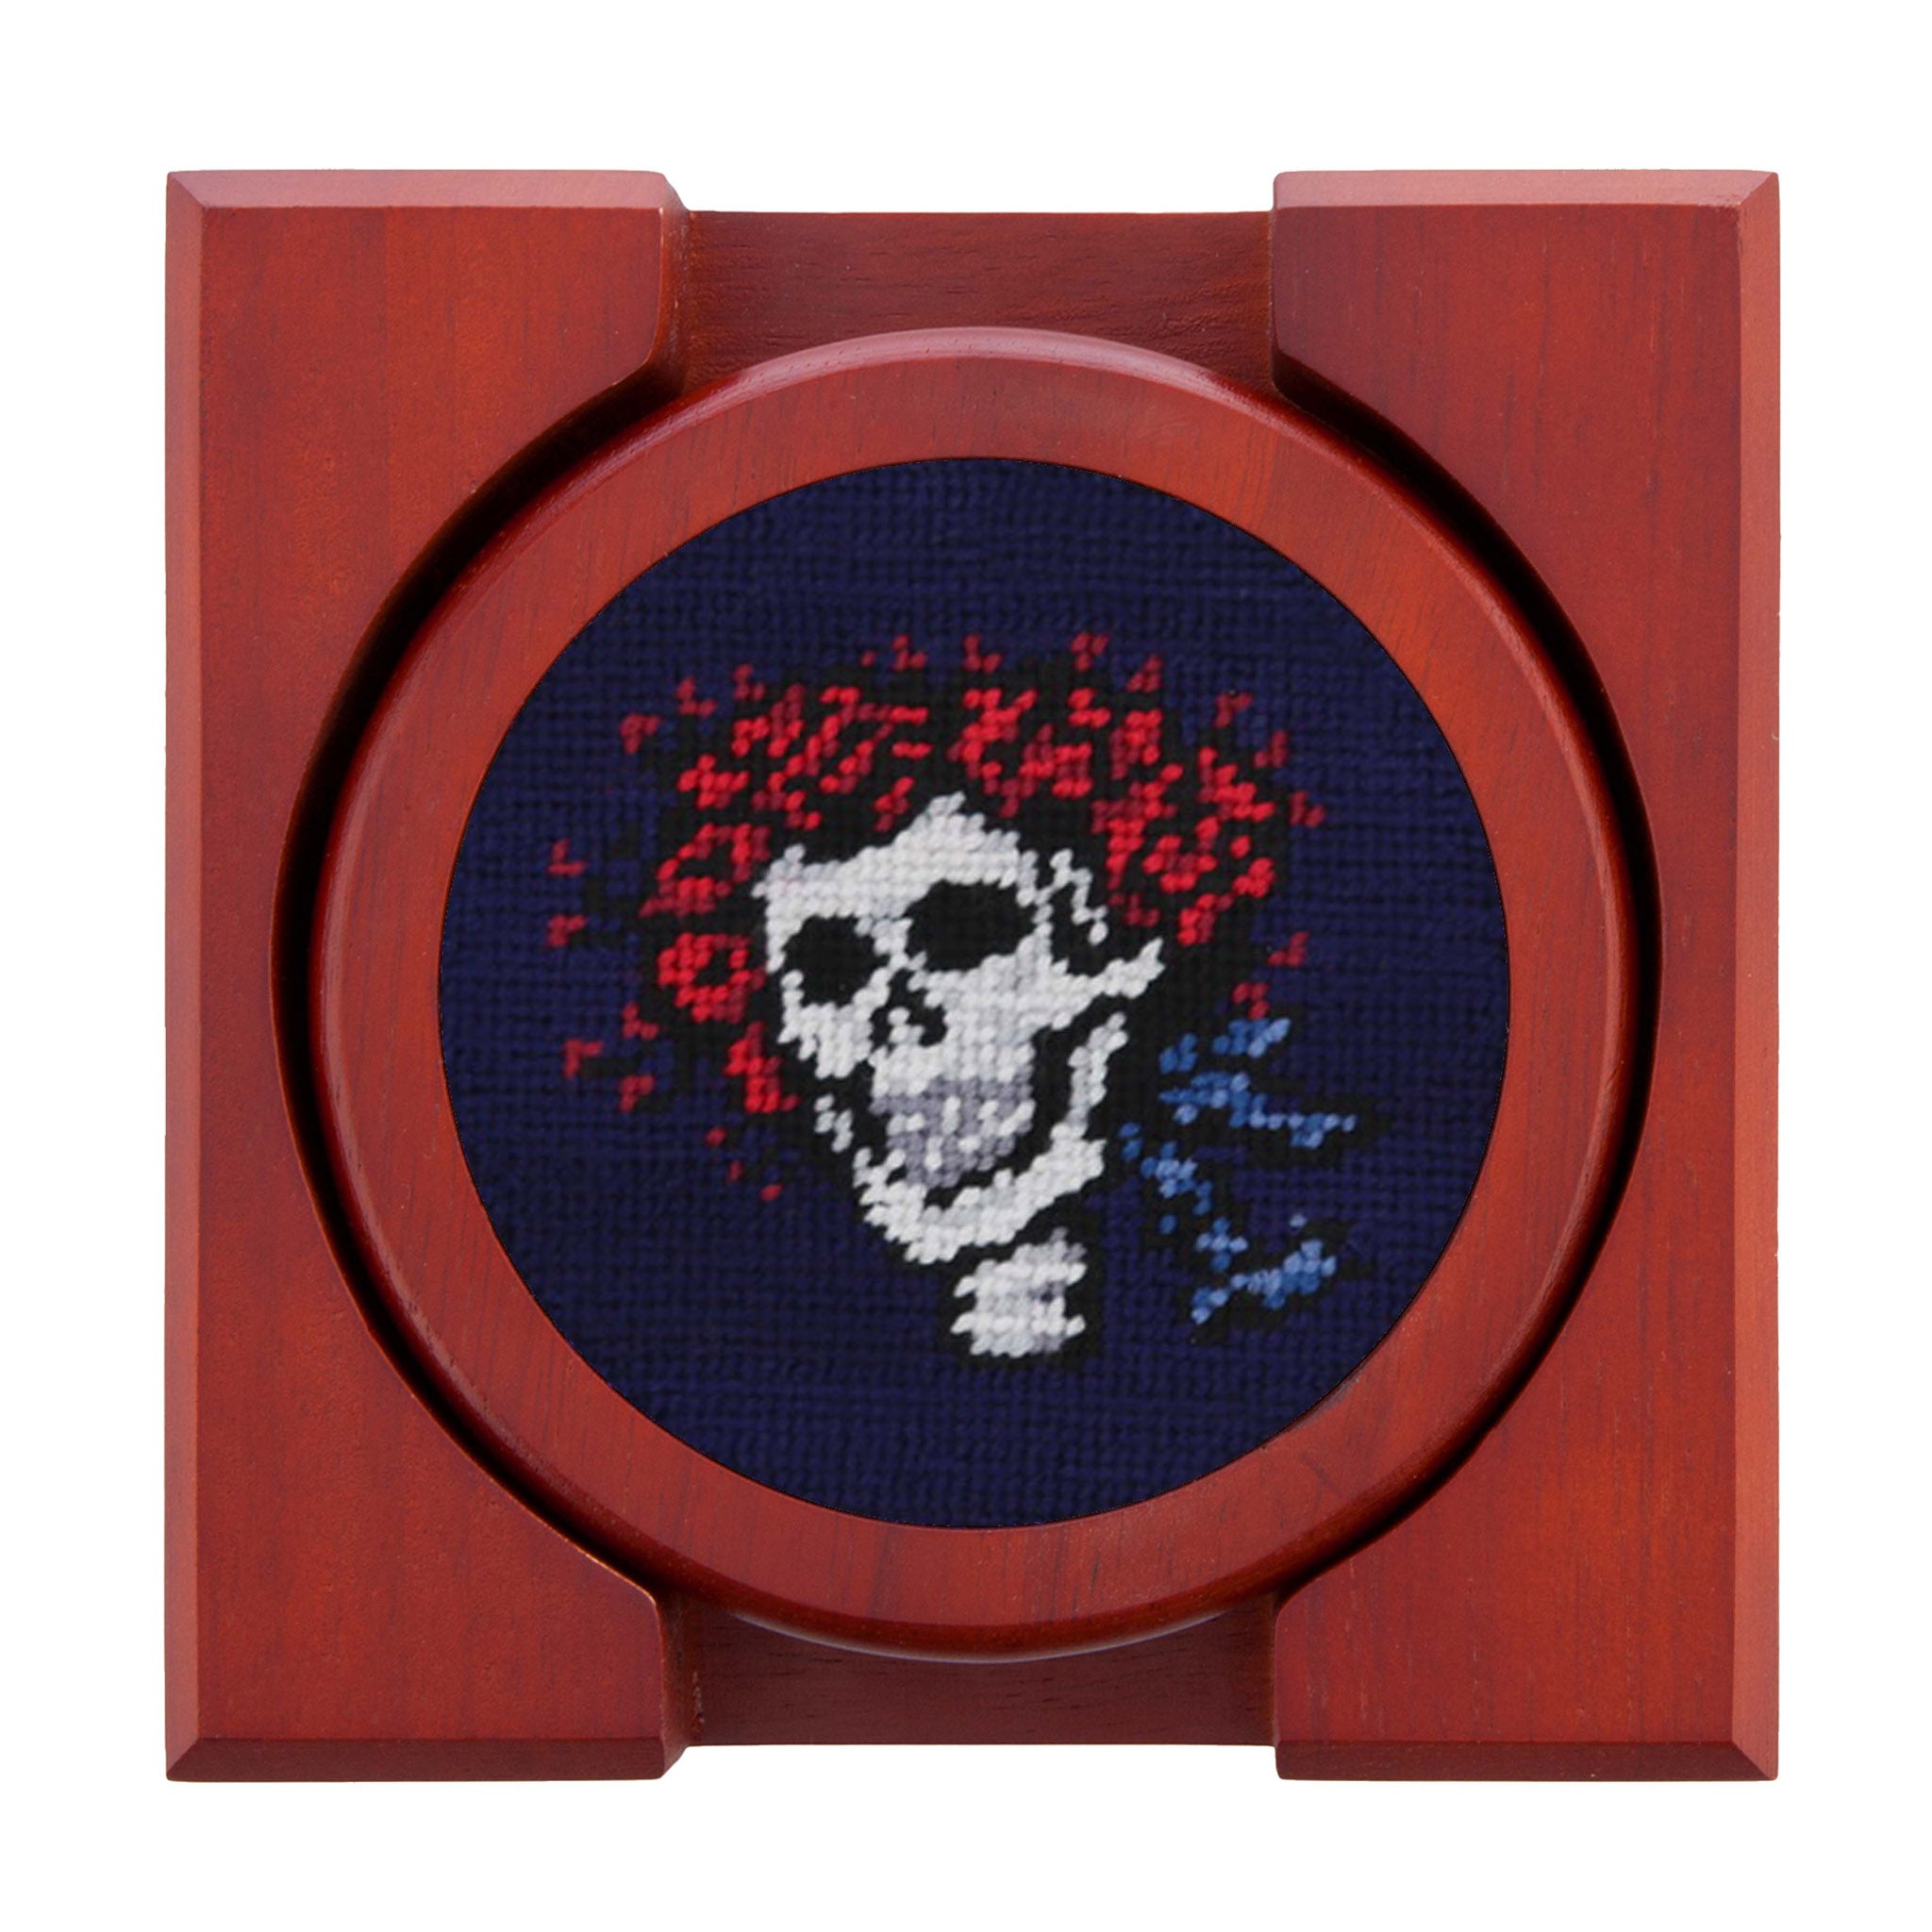 Smathers and Branson Grateful Dead Life Dark Navy Needlepoint Coasters with coaster holder  